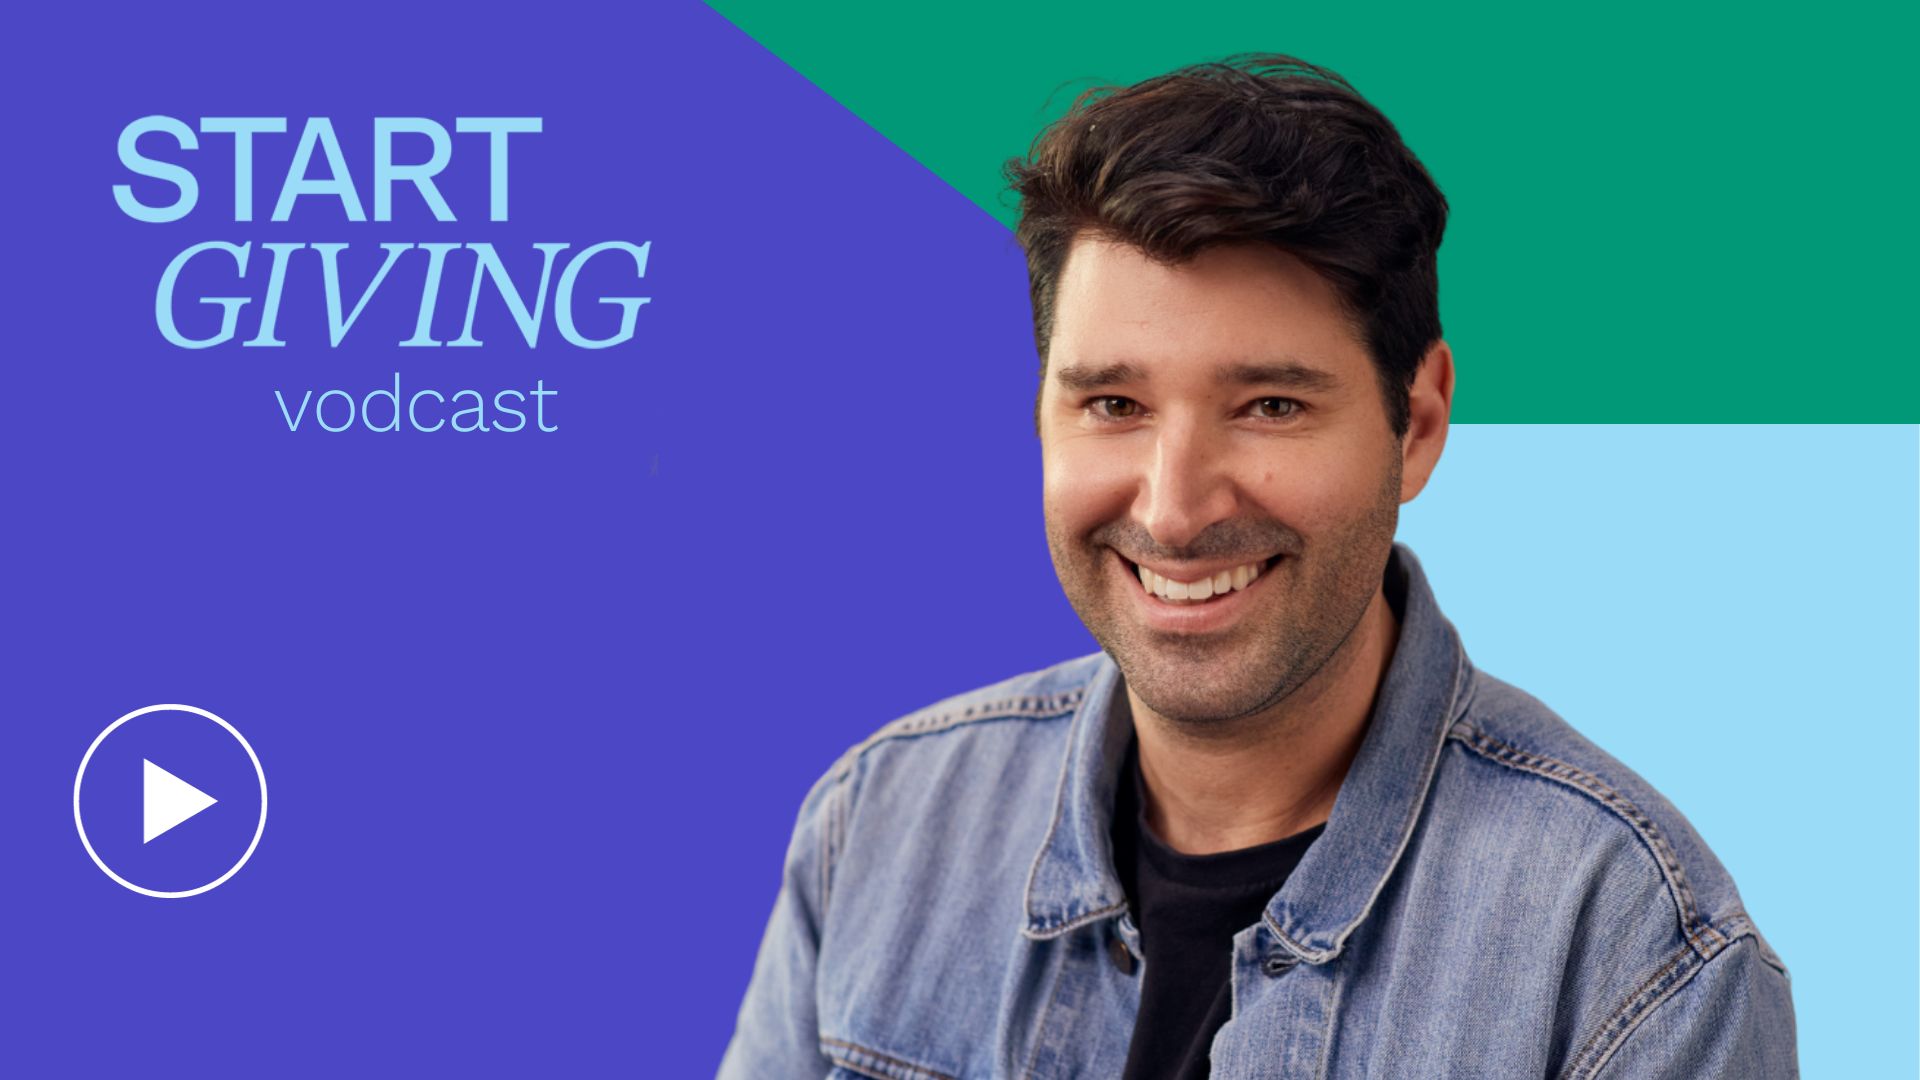 StartGiving vodcast with Cliff Obrecht